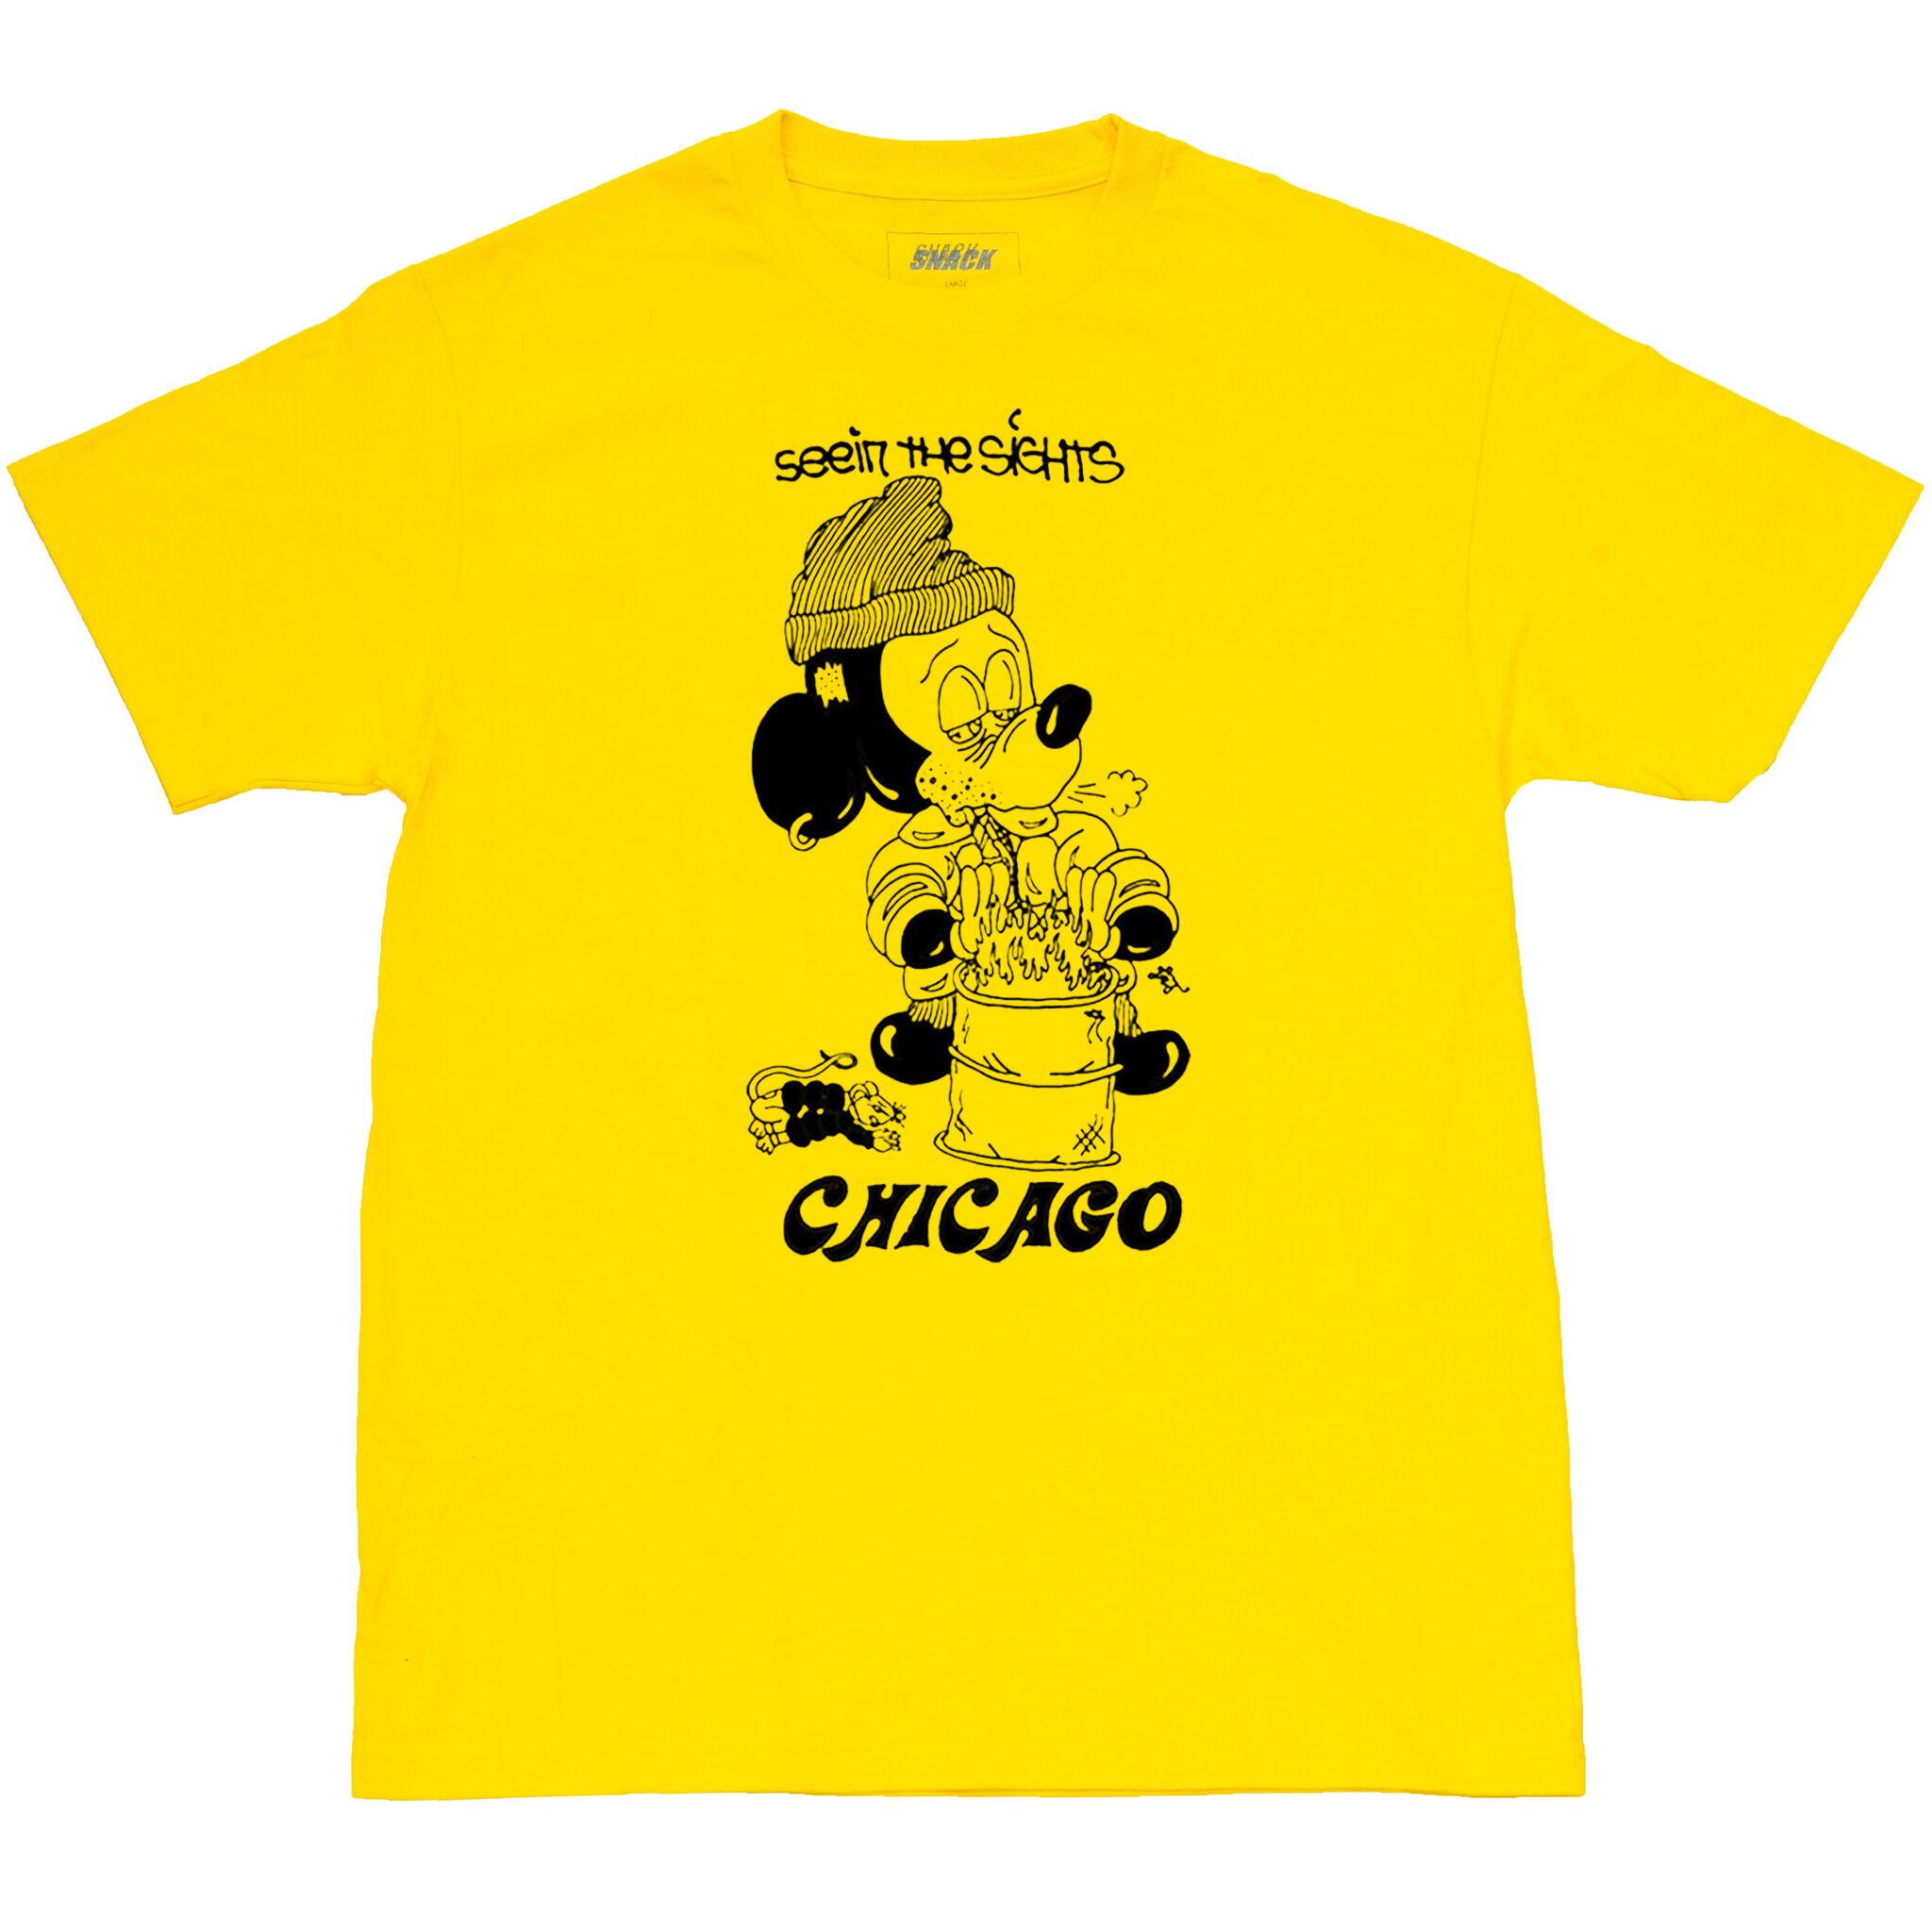 Snack Skateboards 【SEEIN THE SIGHTS CHICAGO TEE - YELLOW】